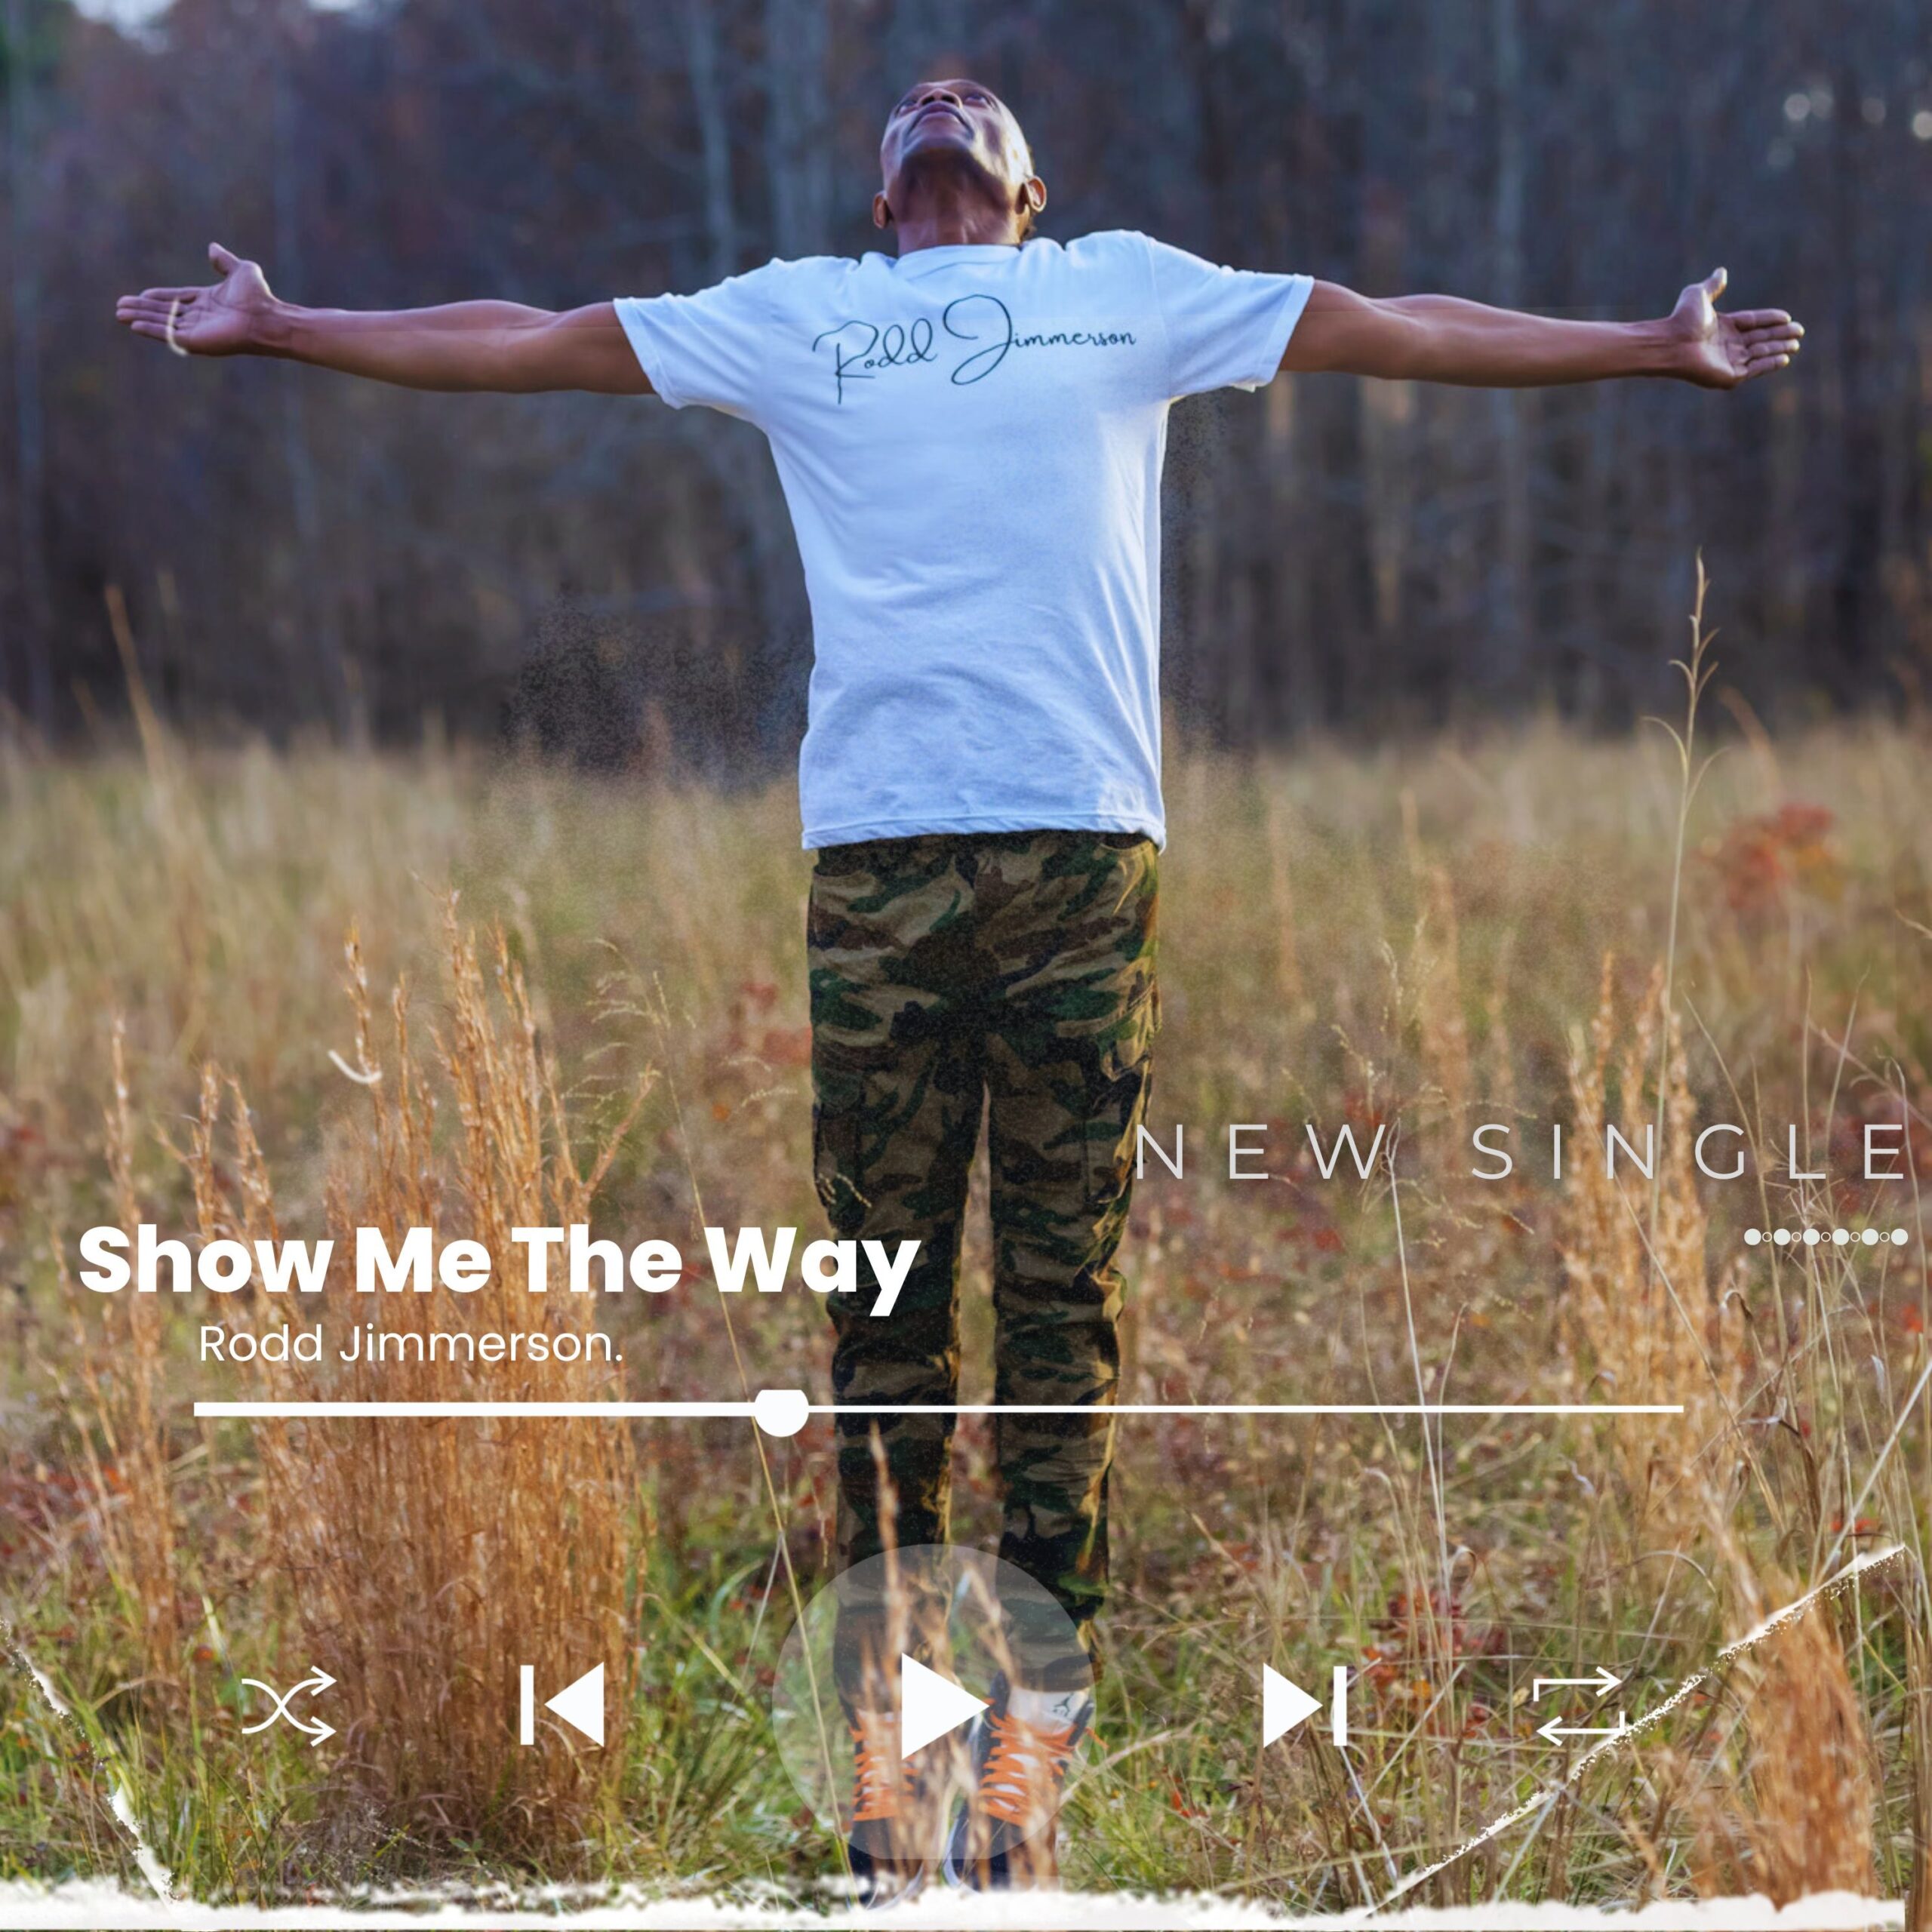 A Moving Spectacle of Raw & Unbridled Emotions – Rodd Jimmerson Drops Soul-Stirring New Single “Show Me The Way”